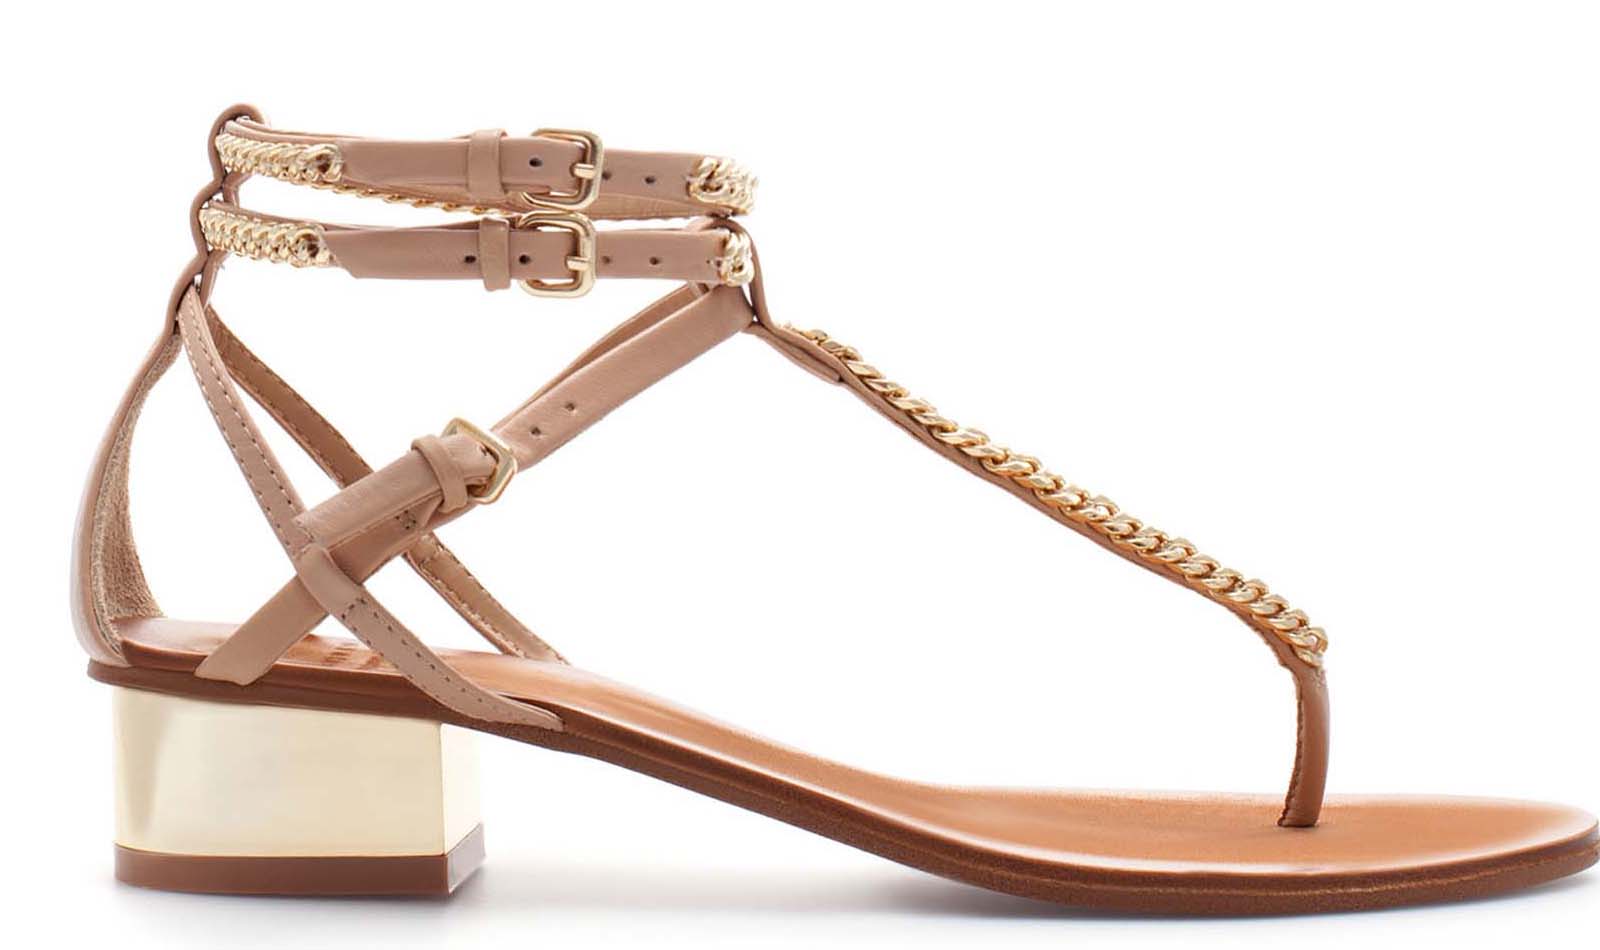  ZARA  NEW COLLECTION 2013 LEATHER NUDE CHAIN SANDALS  SHOES  